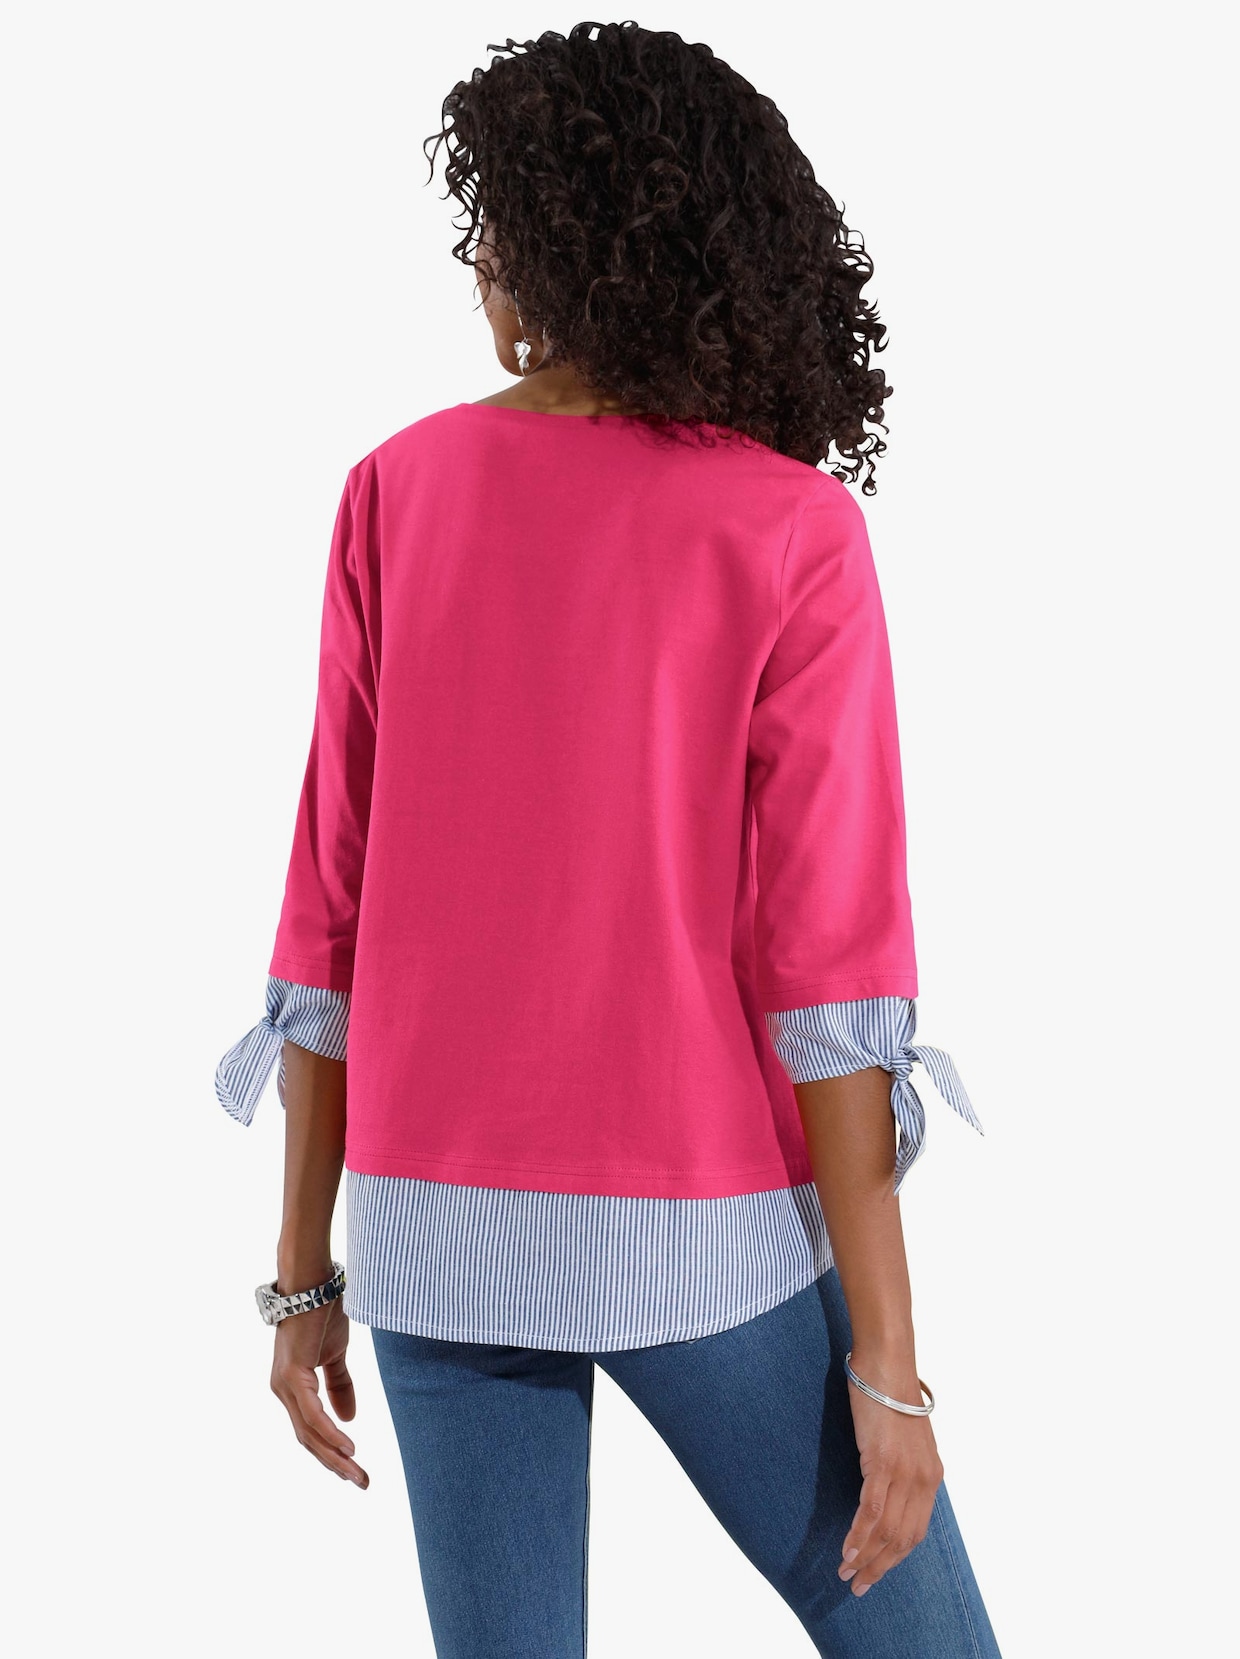 2-in-1-shirt - pink